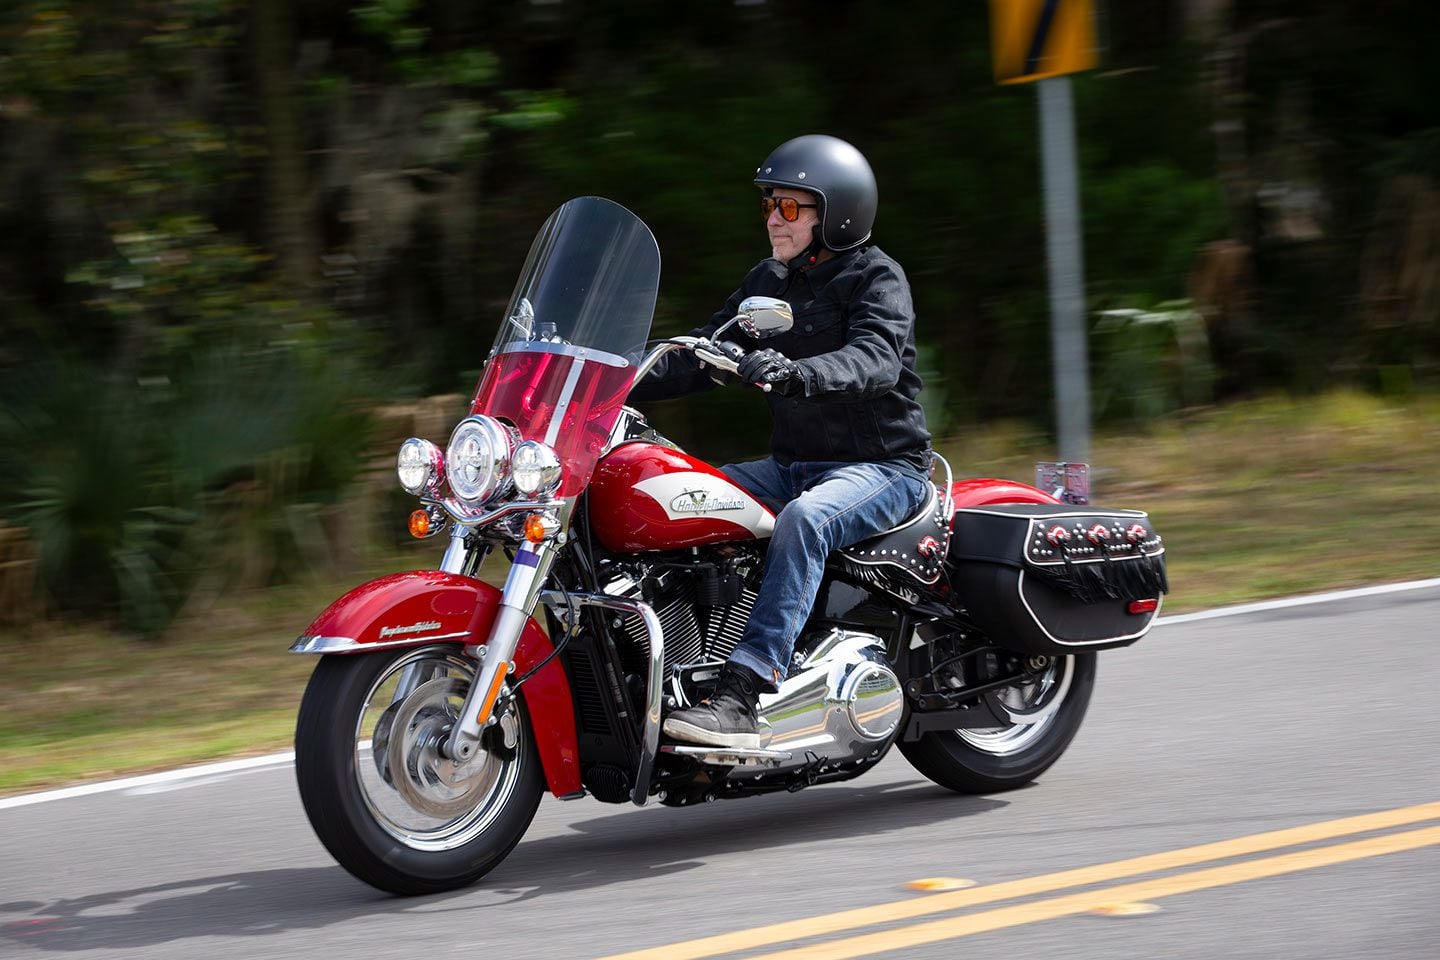 Harley also pulled the covers off its new 2024 Hydra-Glide Revival model as part of its Icons Collection. A highlight was getting seat time on it around the Ormond Loop.